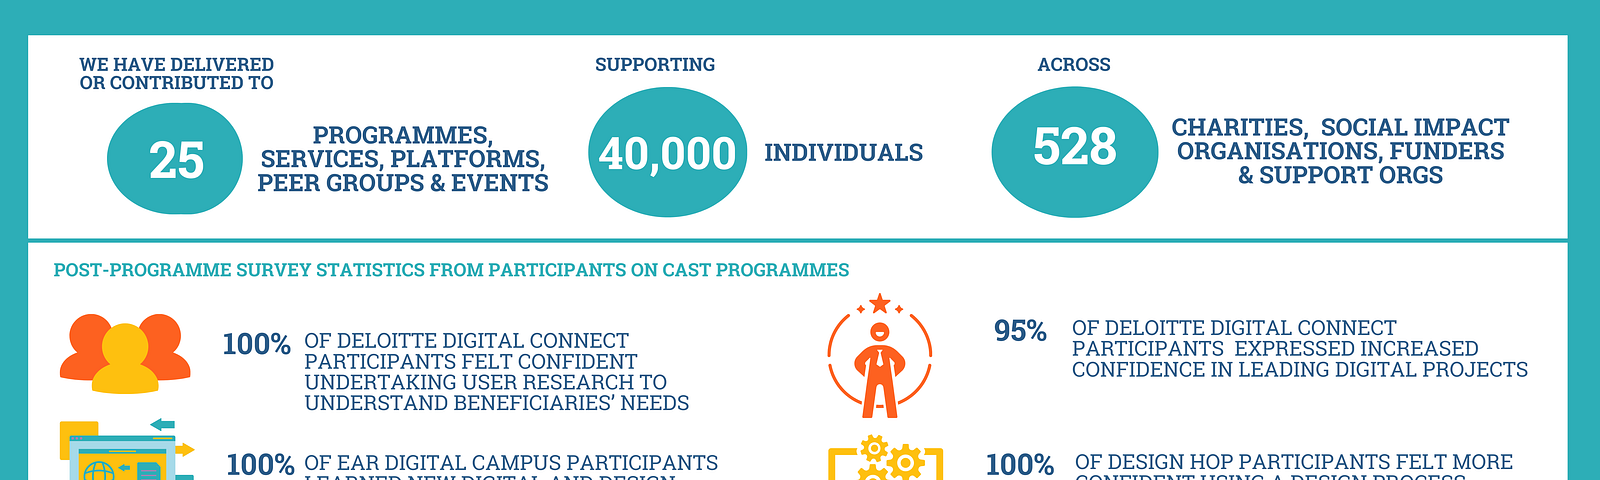 An infographic with stats about CAST — e.g. Delivered or contributed to 25 programmes, services, platforms, peer groups & events, supporting 40,000 individuals across 528 charities, social impact organisations, funders & support orgs. See full description here: https://www.wearecast.org.uk/about-us/our-impact/accessible-diagrams/